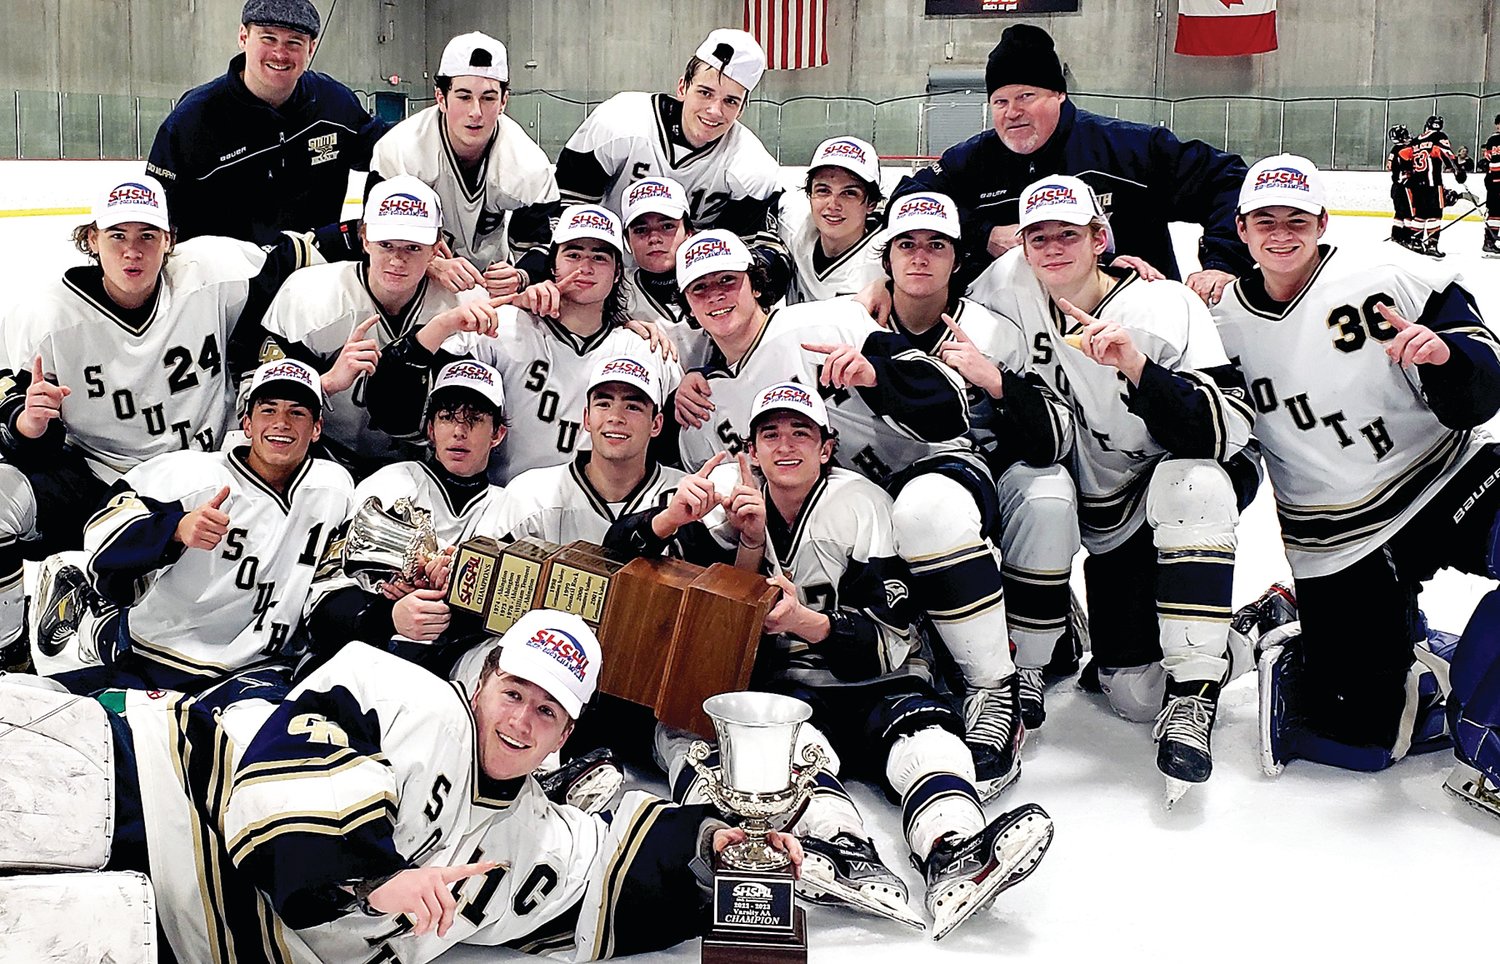 Members of the Council Rock South ice hockey team celebrate winning the Suburban High School Hockey League National Division title.